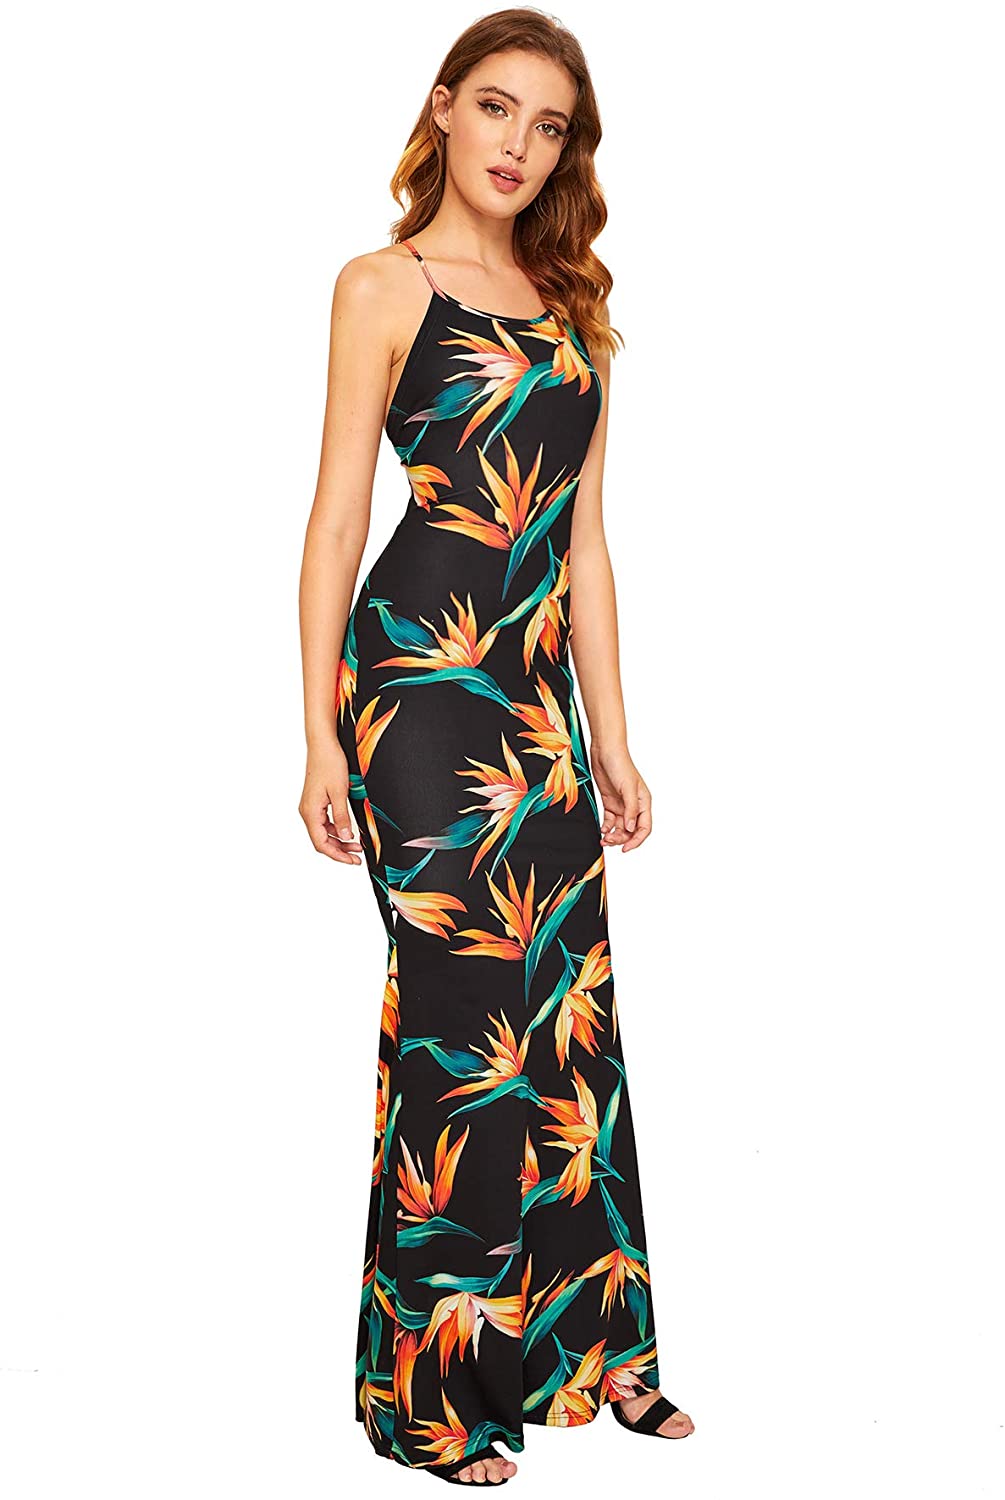 SheIn Women's Strappy Backless Summer Evening Party Maxi Dress | eBay